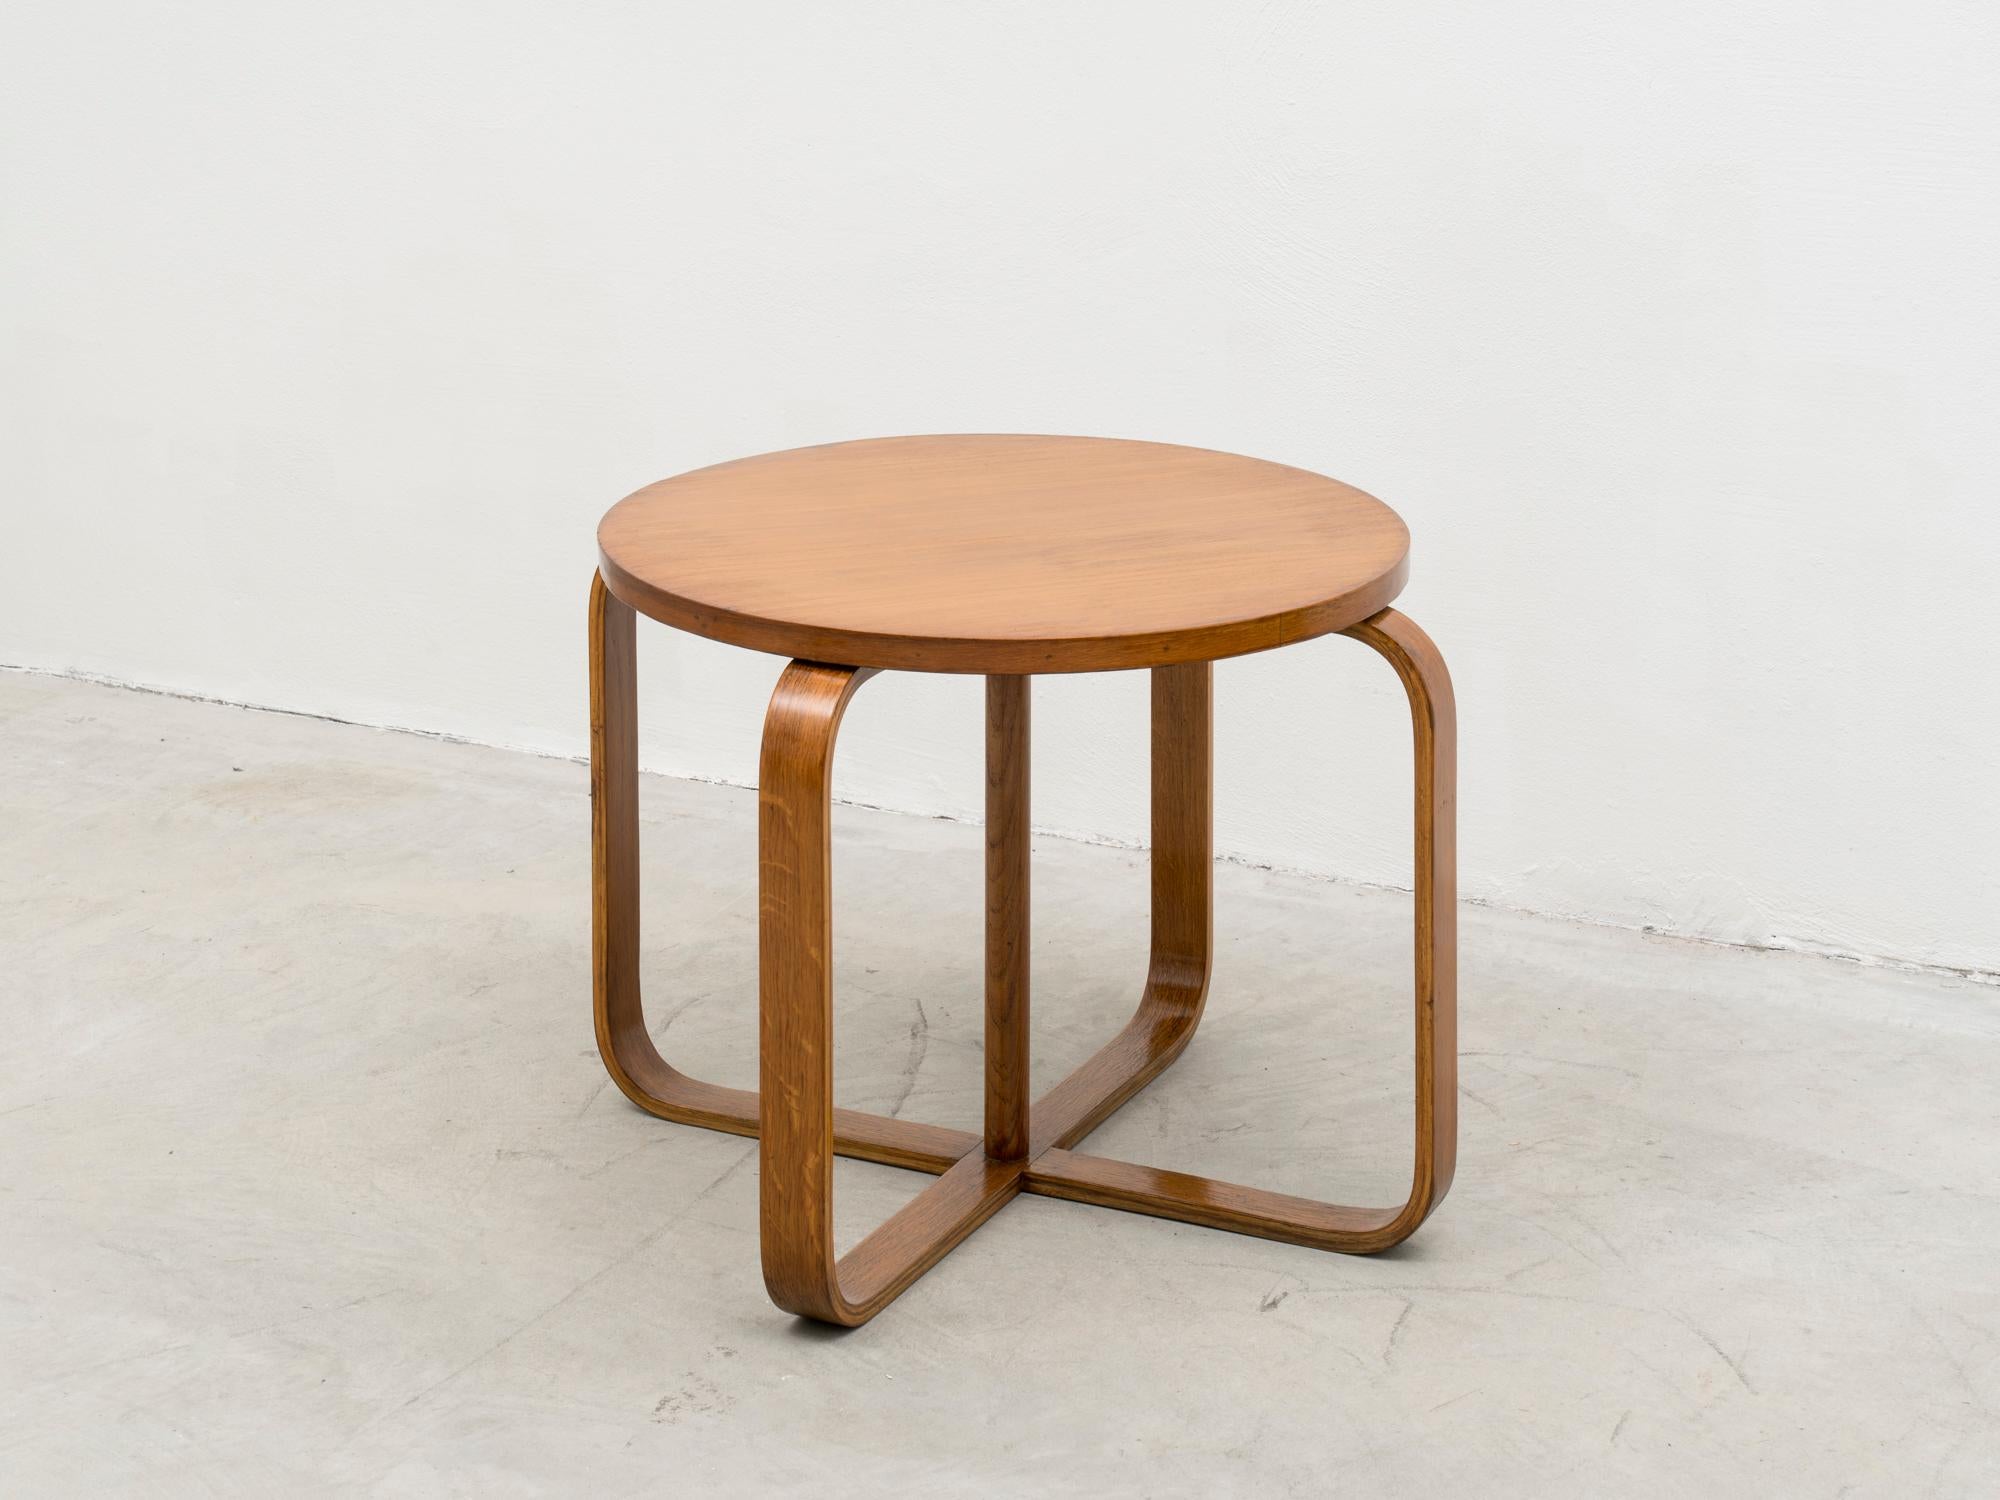 Italian Rationalist Wooden Coffe Table by Giuseppe Pagano Pogatschnig for Maggioni 1940s For Sale